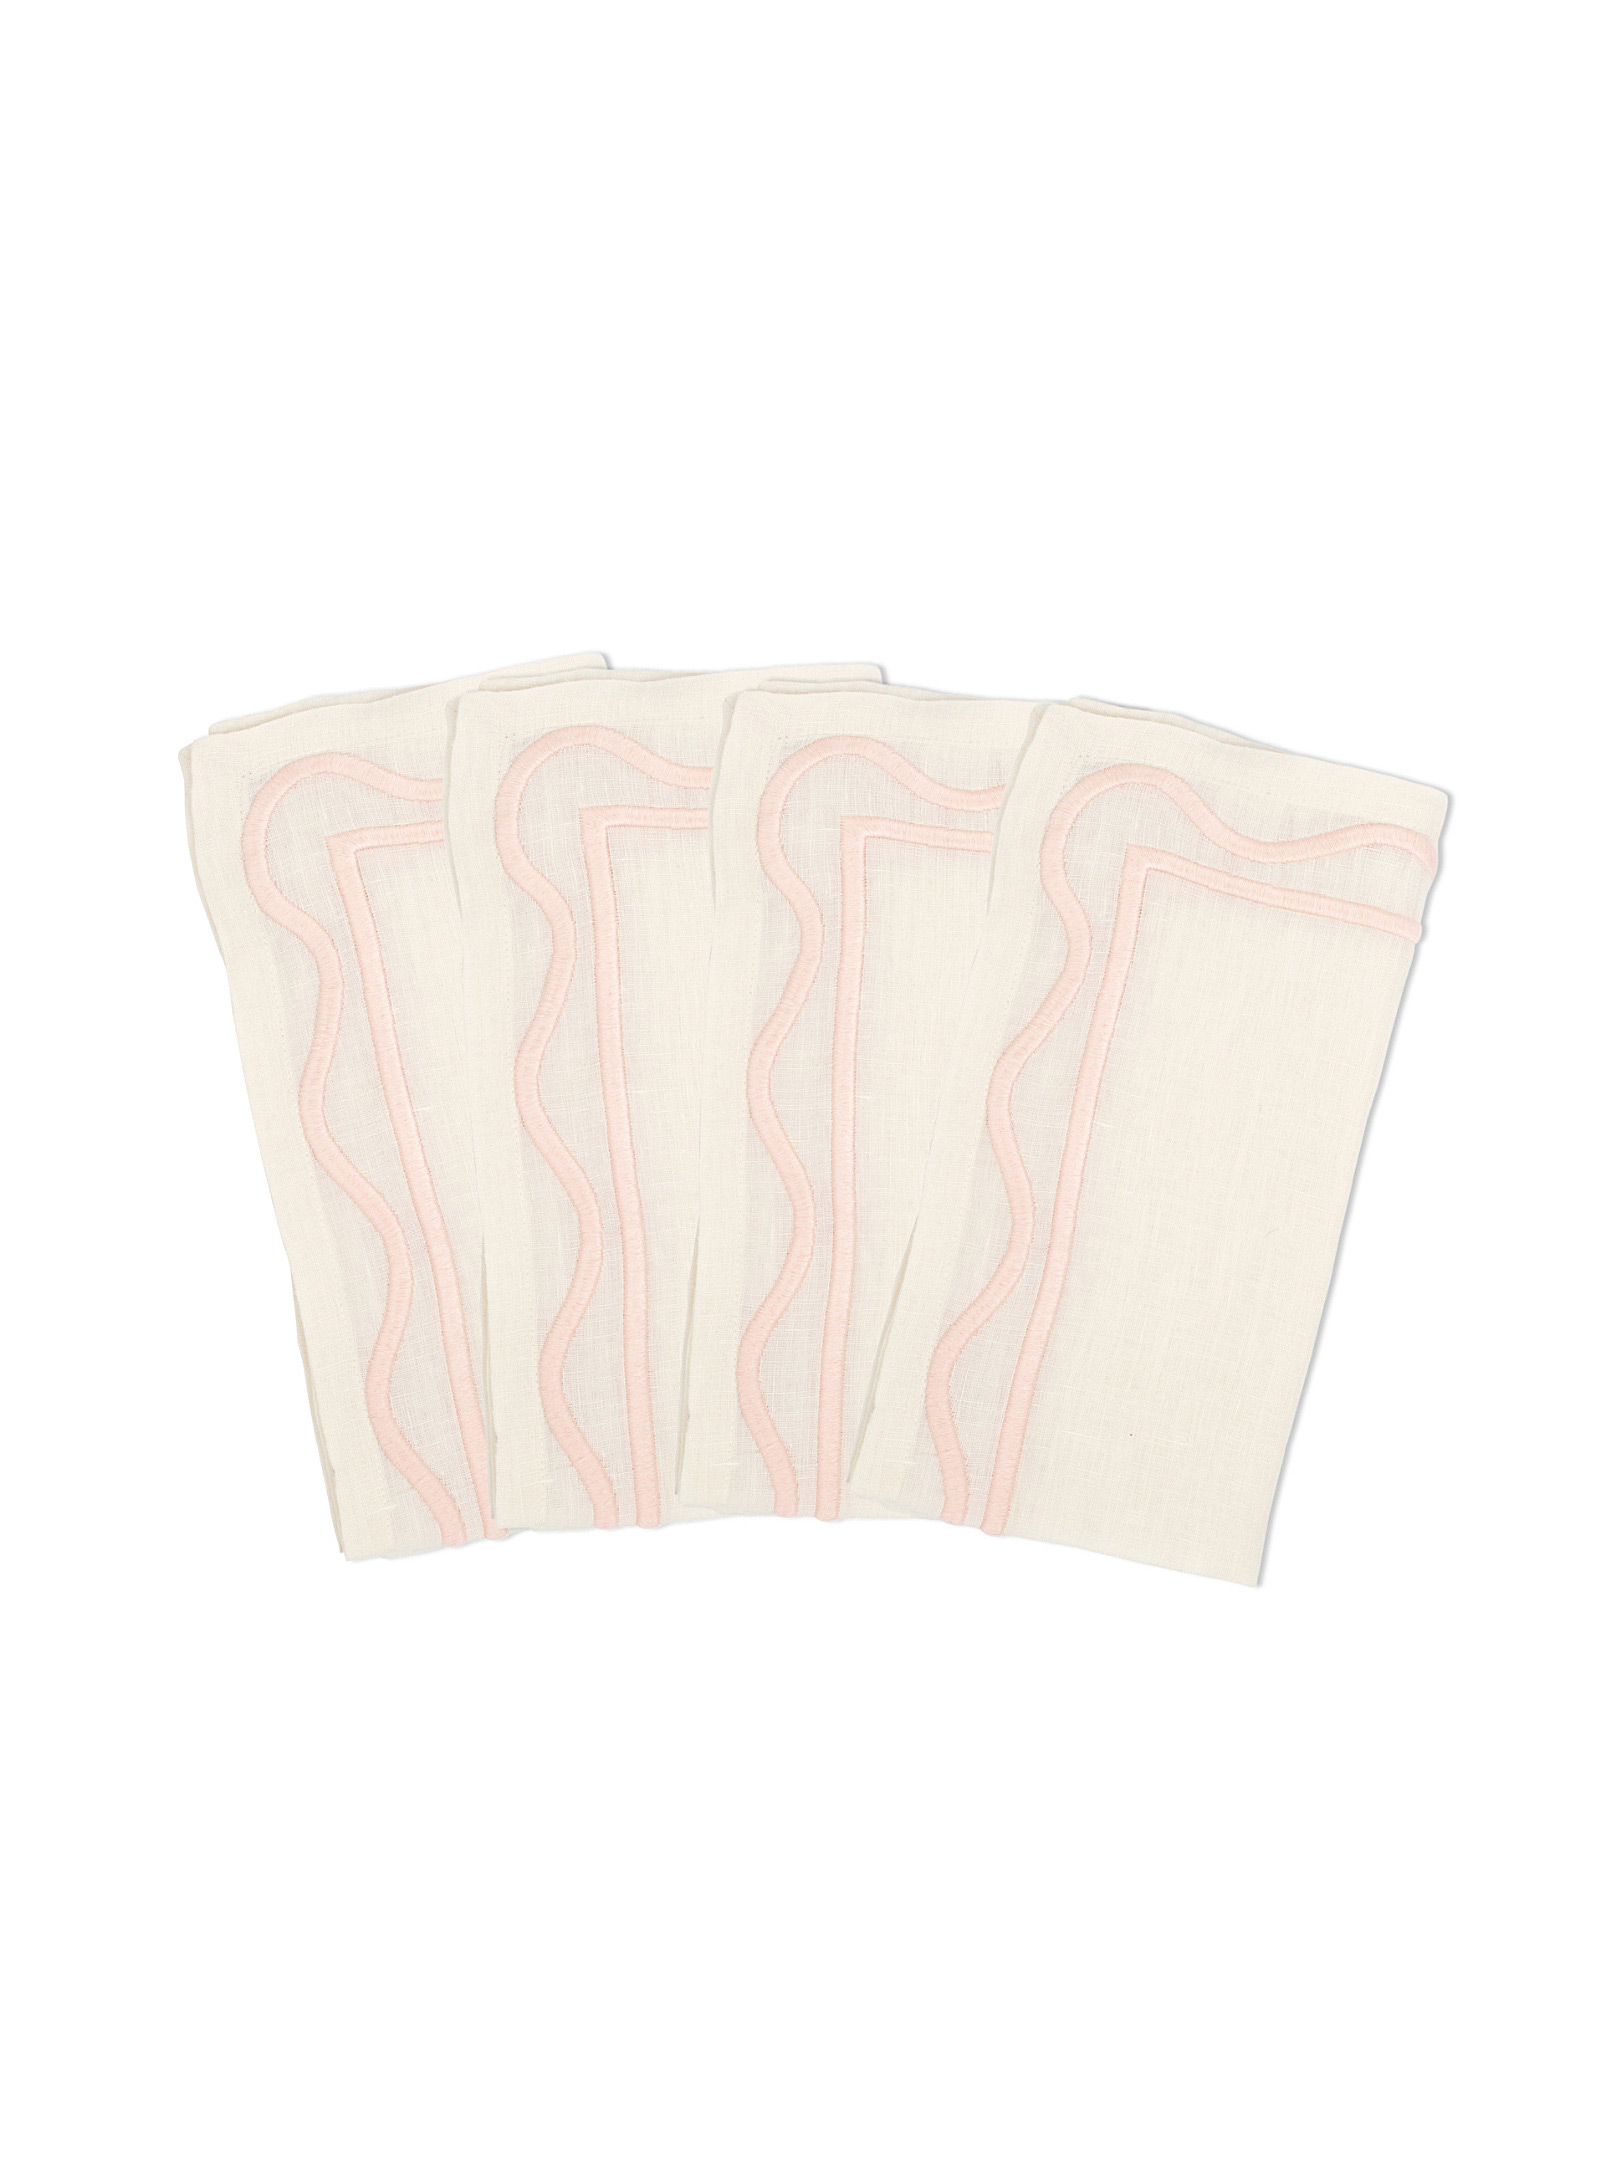 Misette Scalloped Embroidery Linen Napkins Set Of 4 In Pink